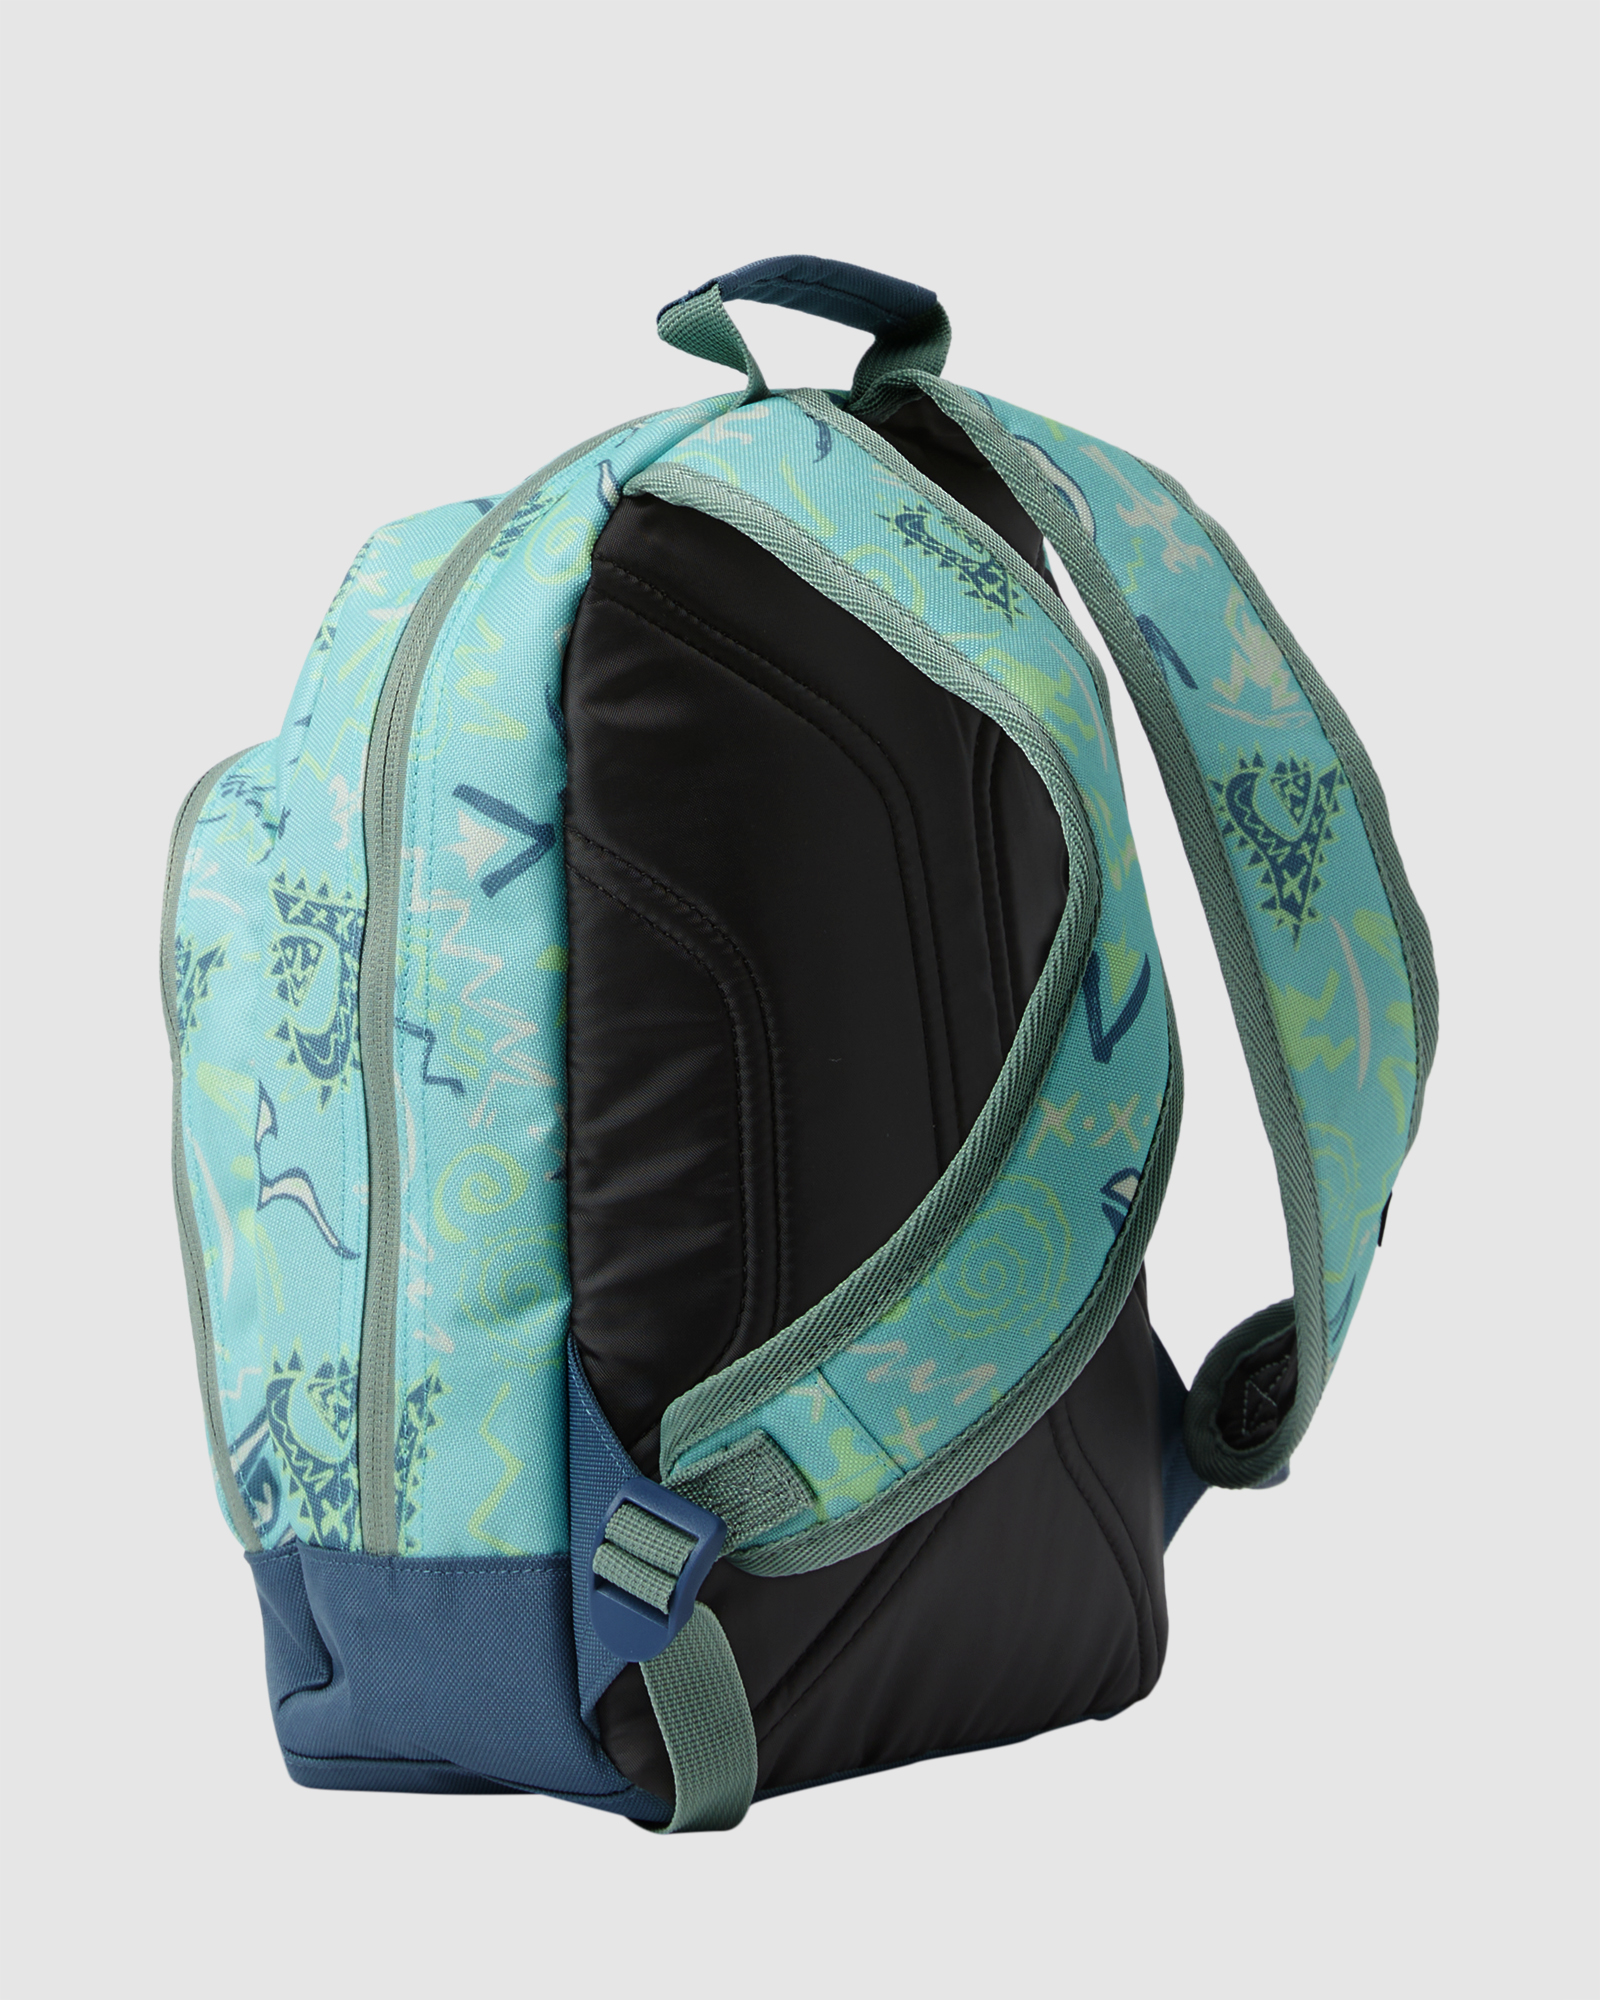 Backpack Pastel Turquoise 12L Quiksilver Chomping Small - SurfStitch |